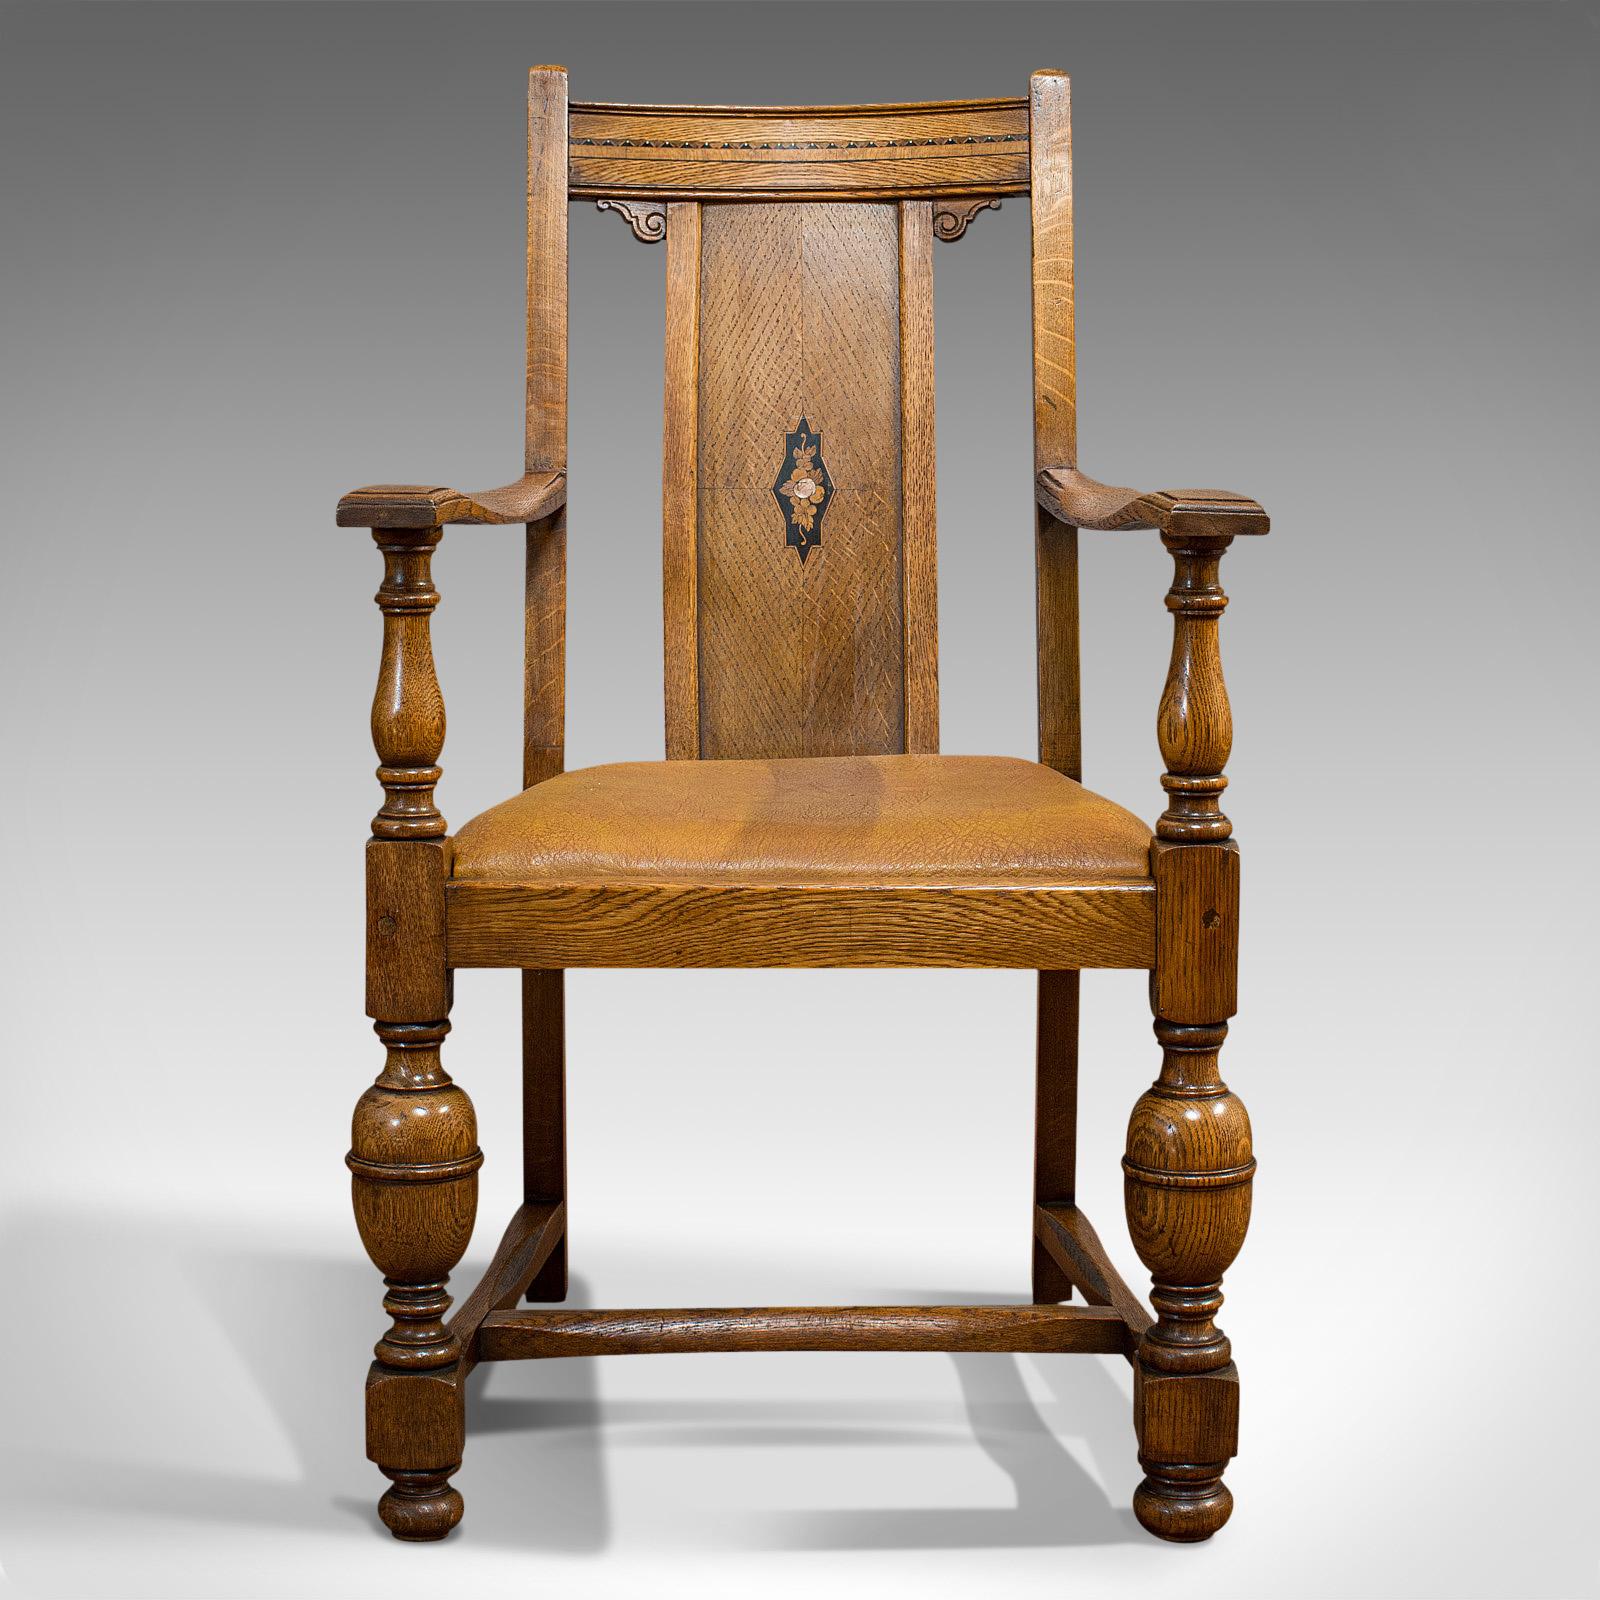 This is a set of 6 antique dining chairs. An English, golden oak dining suite, dating to the Edwardian period, circa 1910.

A suite benefiting from beautiful warm tones 
Each displays a desirable aged patina
Crafted from English golden oak and